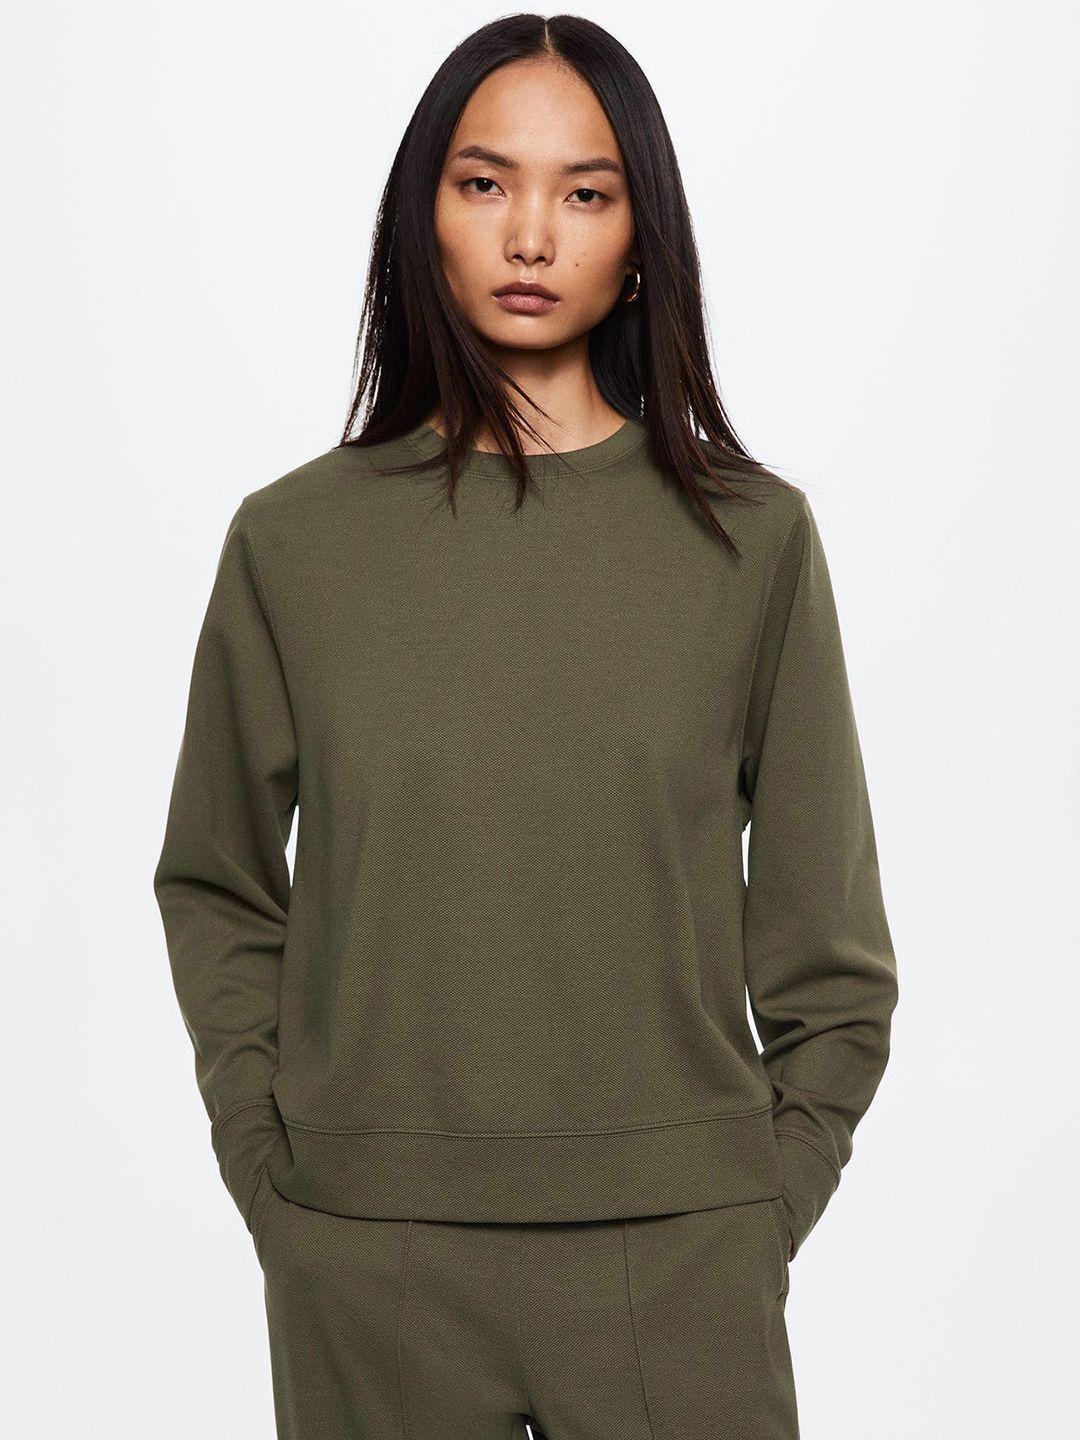 mango women olive green round neck knitted sustainable pullover